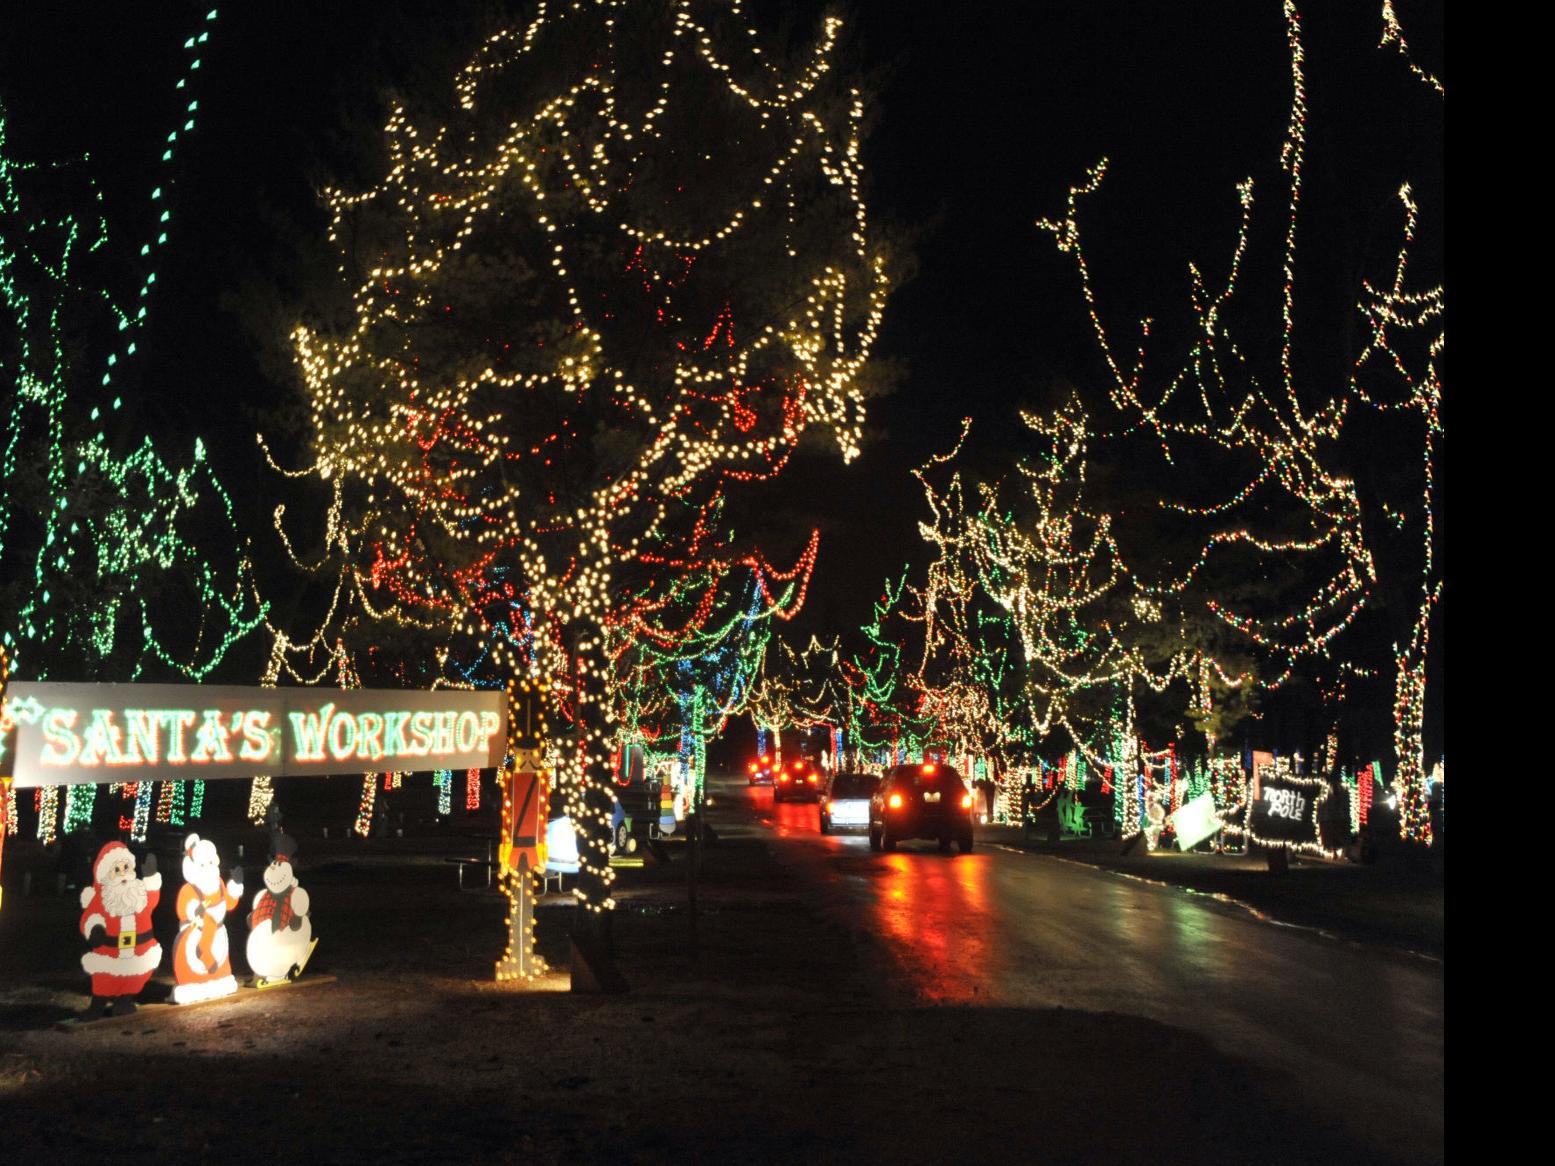 wisconsin christmas carnival of lights 2020 Christmas Carnival Of Lights Opens Nov 26 Local News Journaltimes Com wisconsin christmas carnival of lights 2020